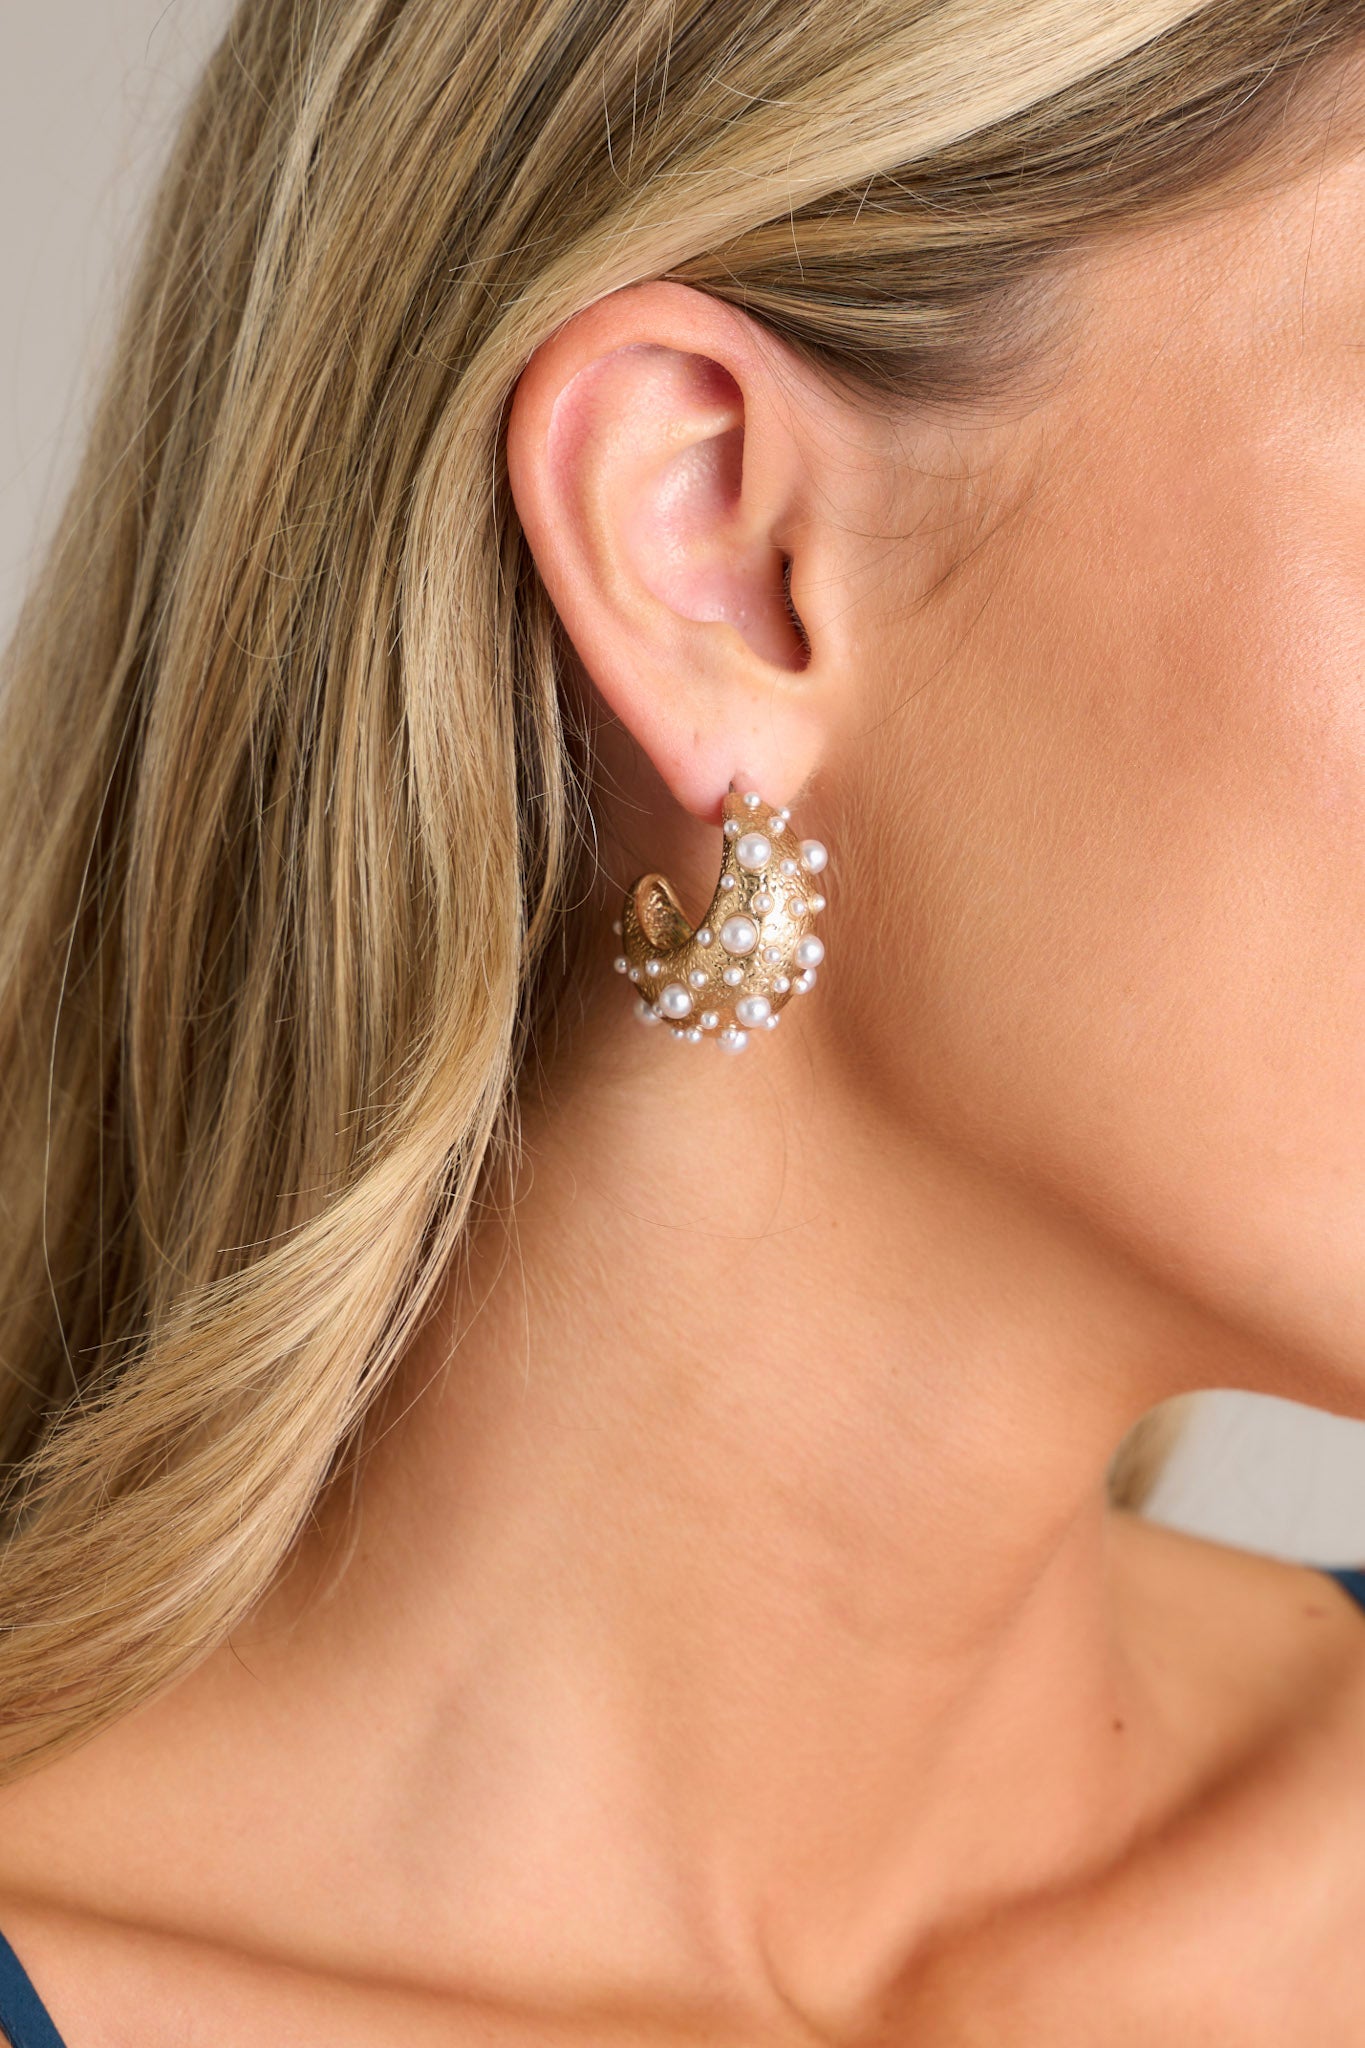 Close-up of these hoop earrings featuring a textured gold material, adorned with faux pearls varying in size, a wide design, and secure post backings.